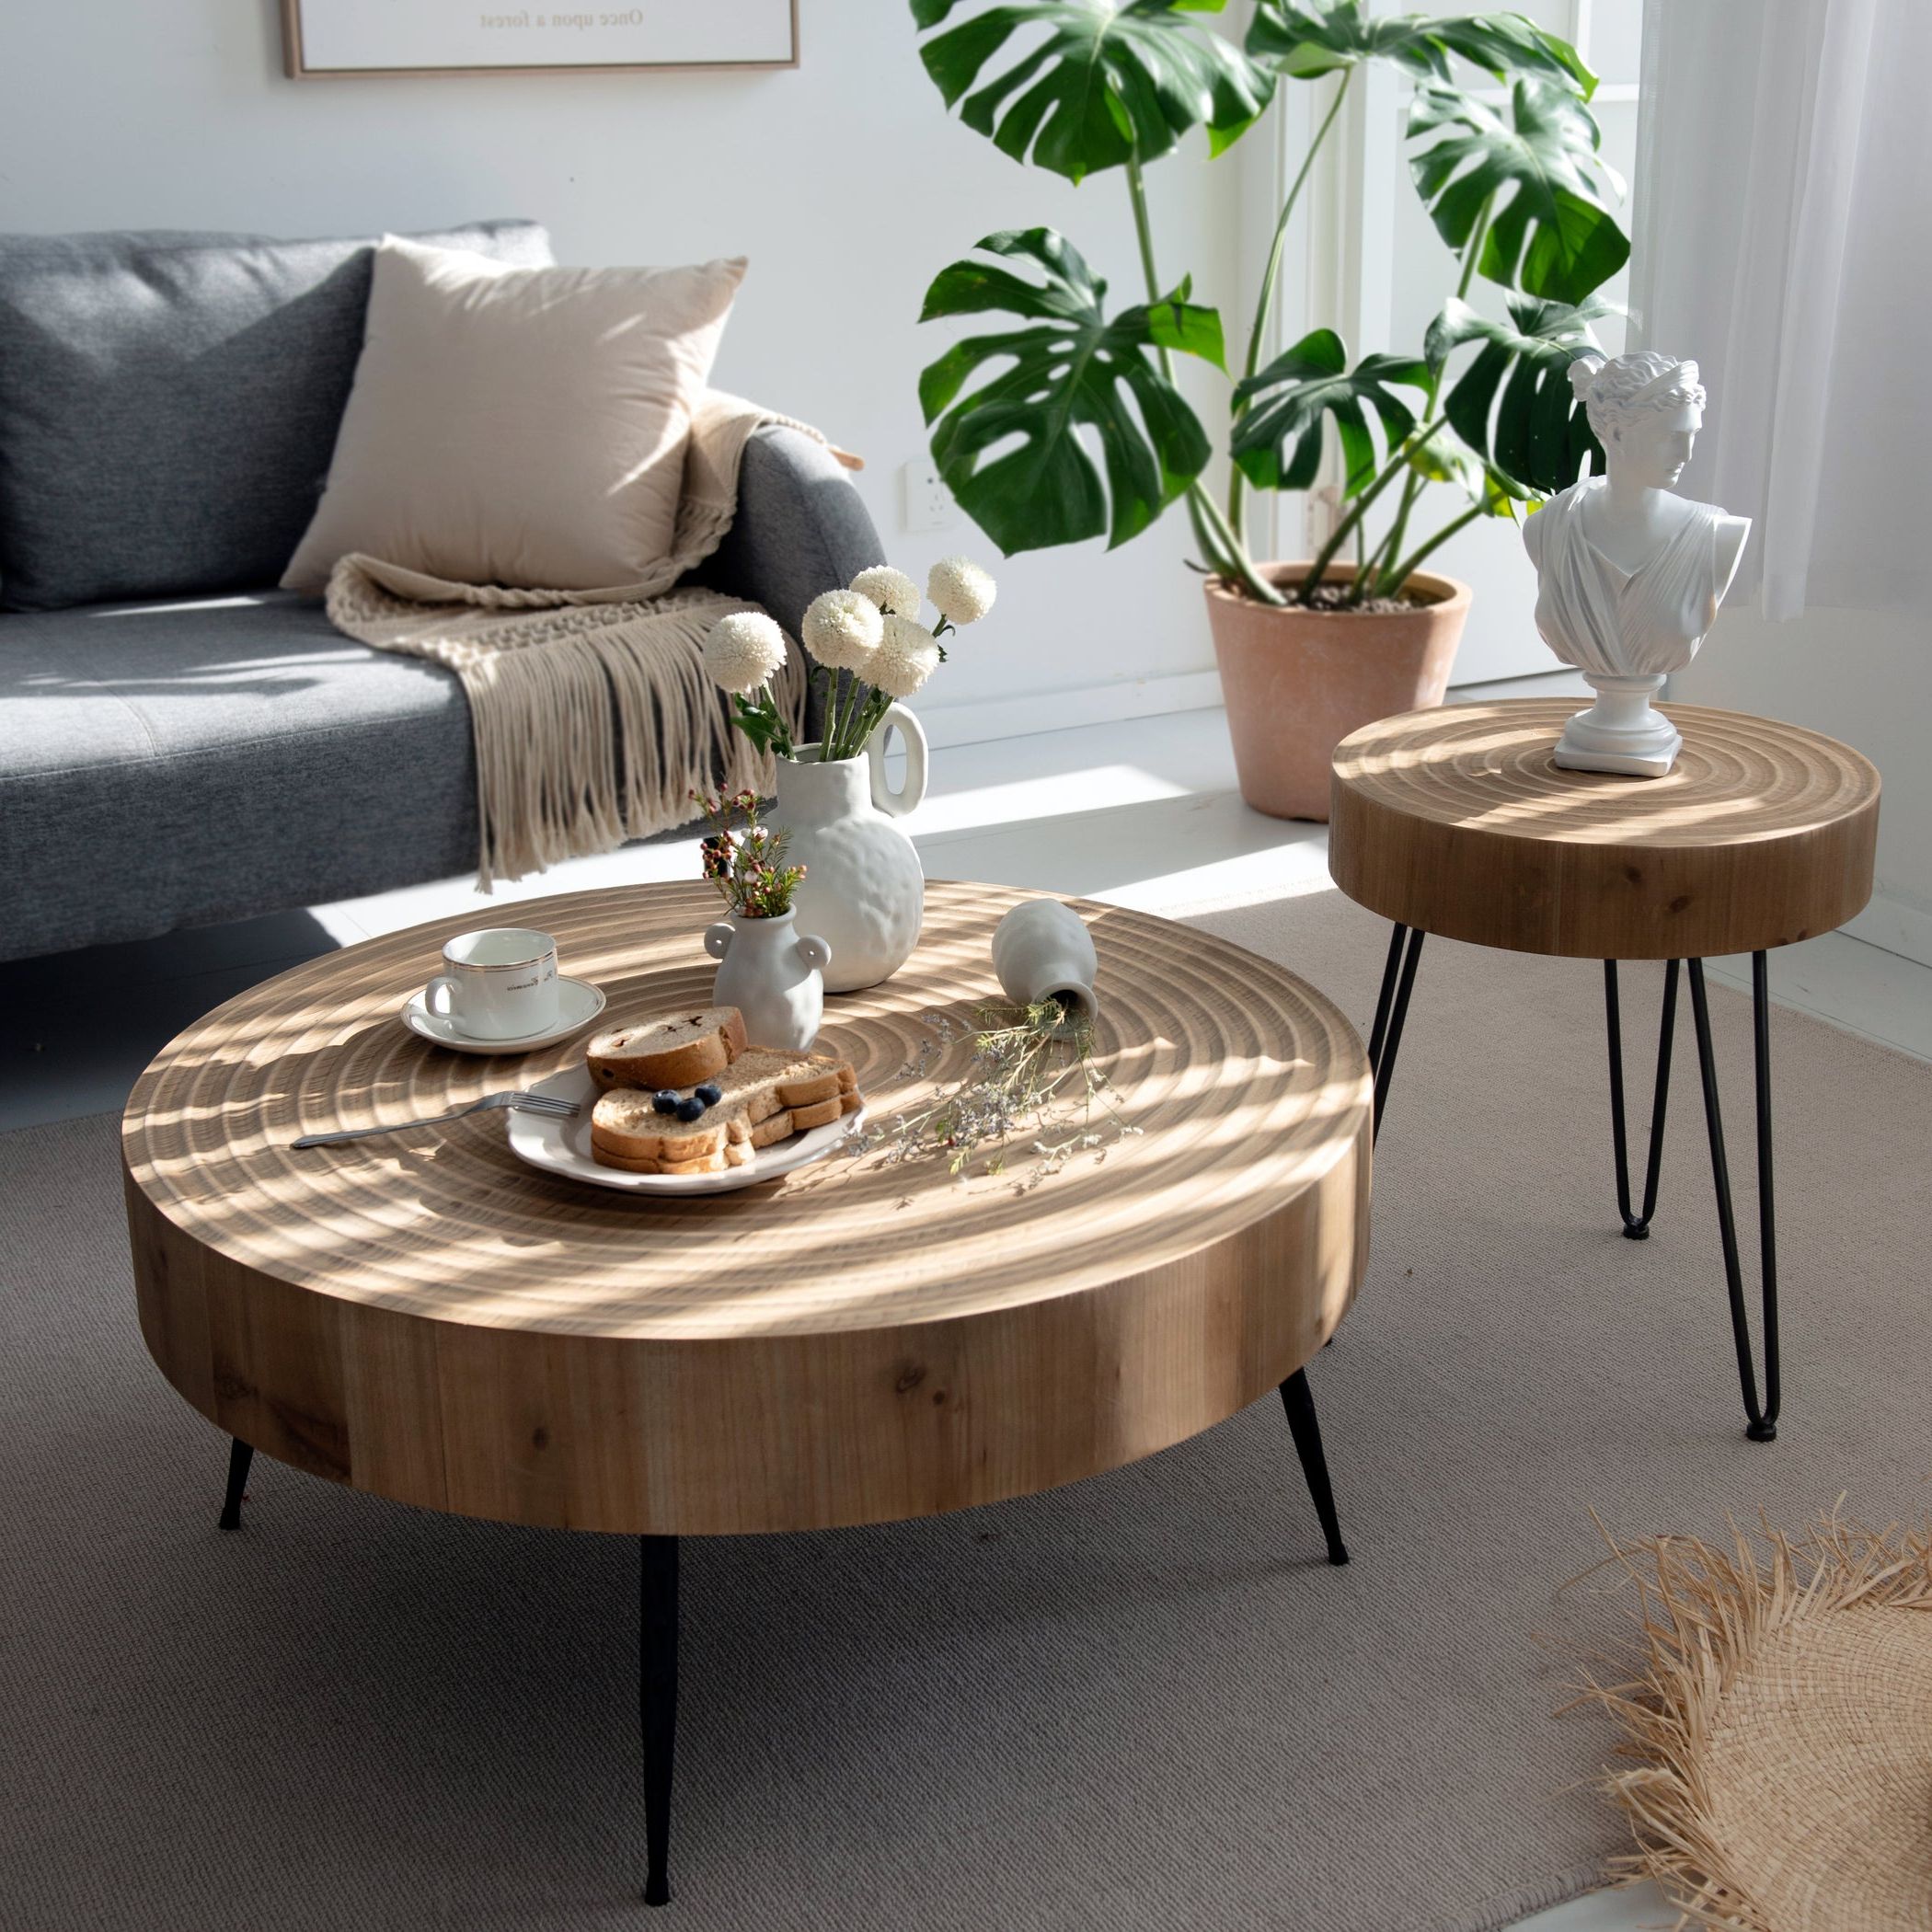 Cozayh 2 Piece Modern Farmhouse Living Room Coffee Table Set, Round Pertaining To 2020 Living Room Farmhouse Coffee Tables (View 13 of 15)